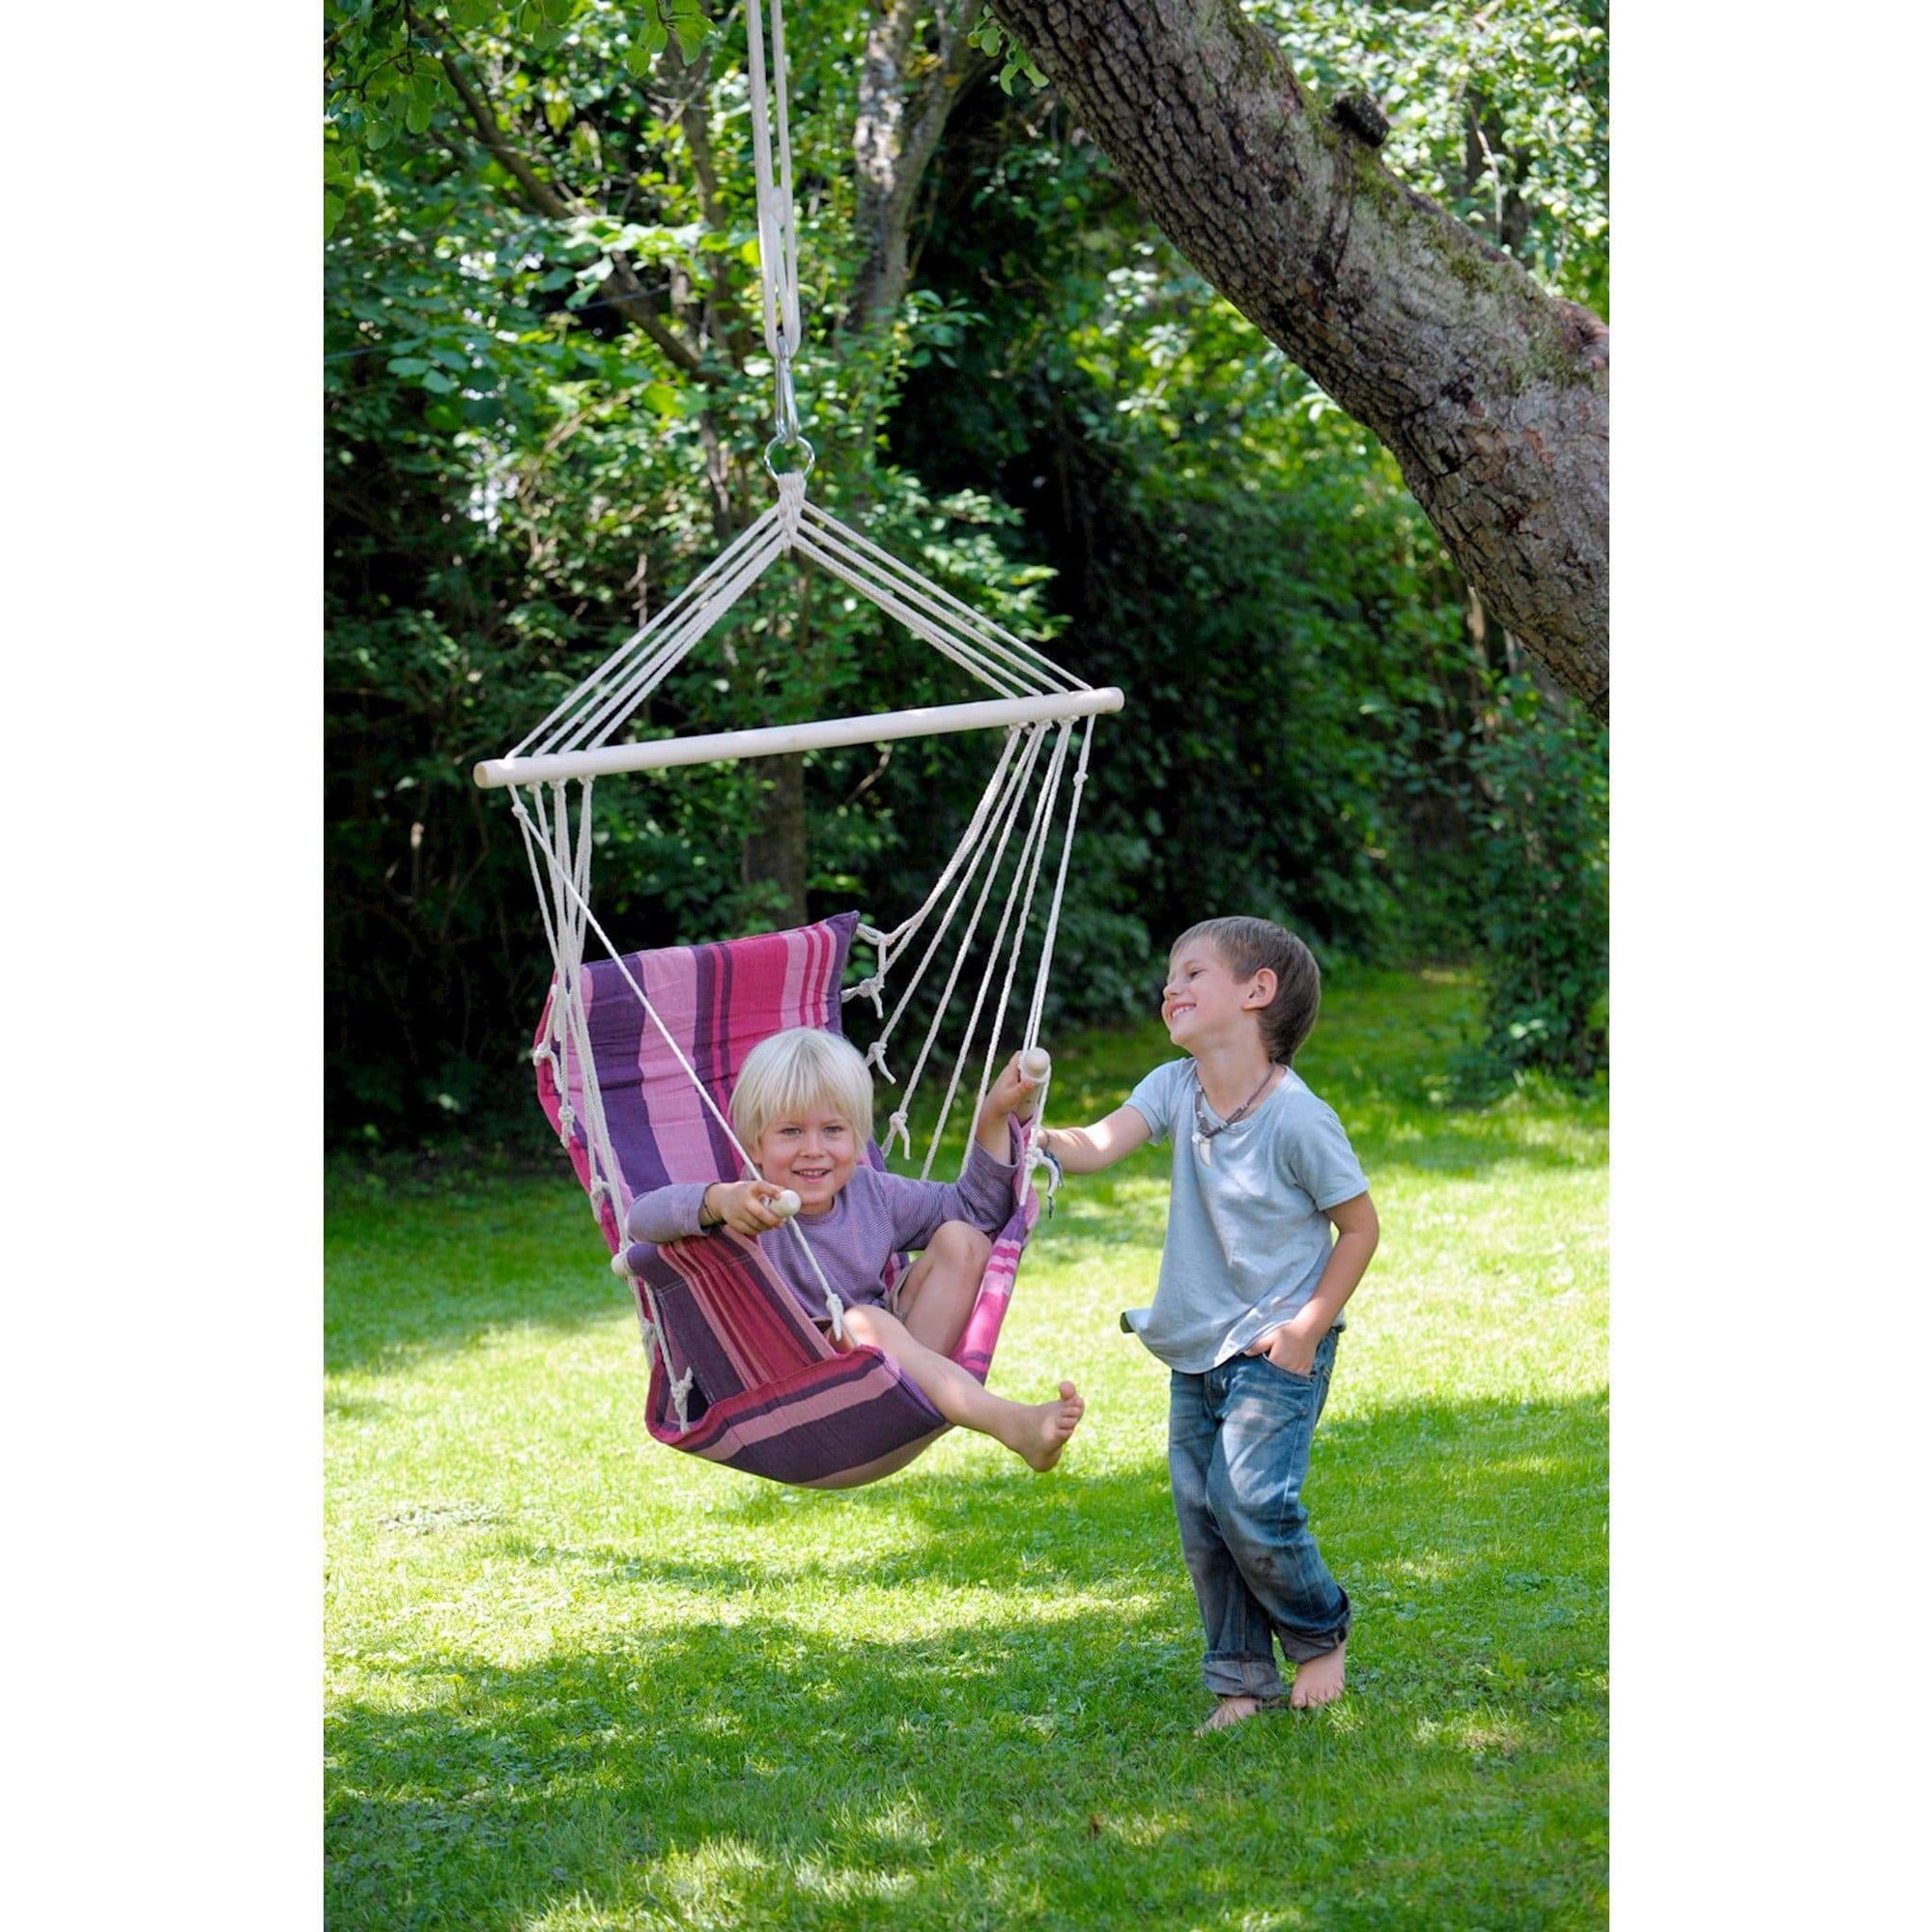 Palau Hammock Chair Available In Candy And Bubblegum Colours Wedo Hammocks